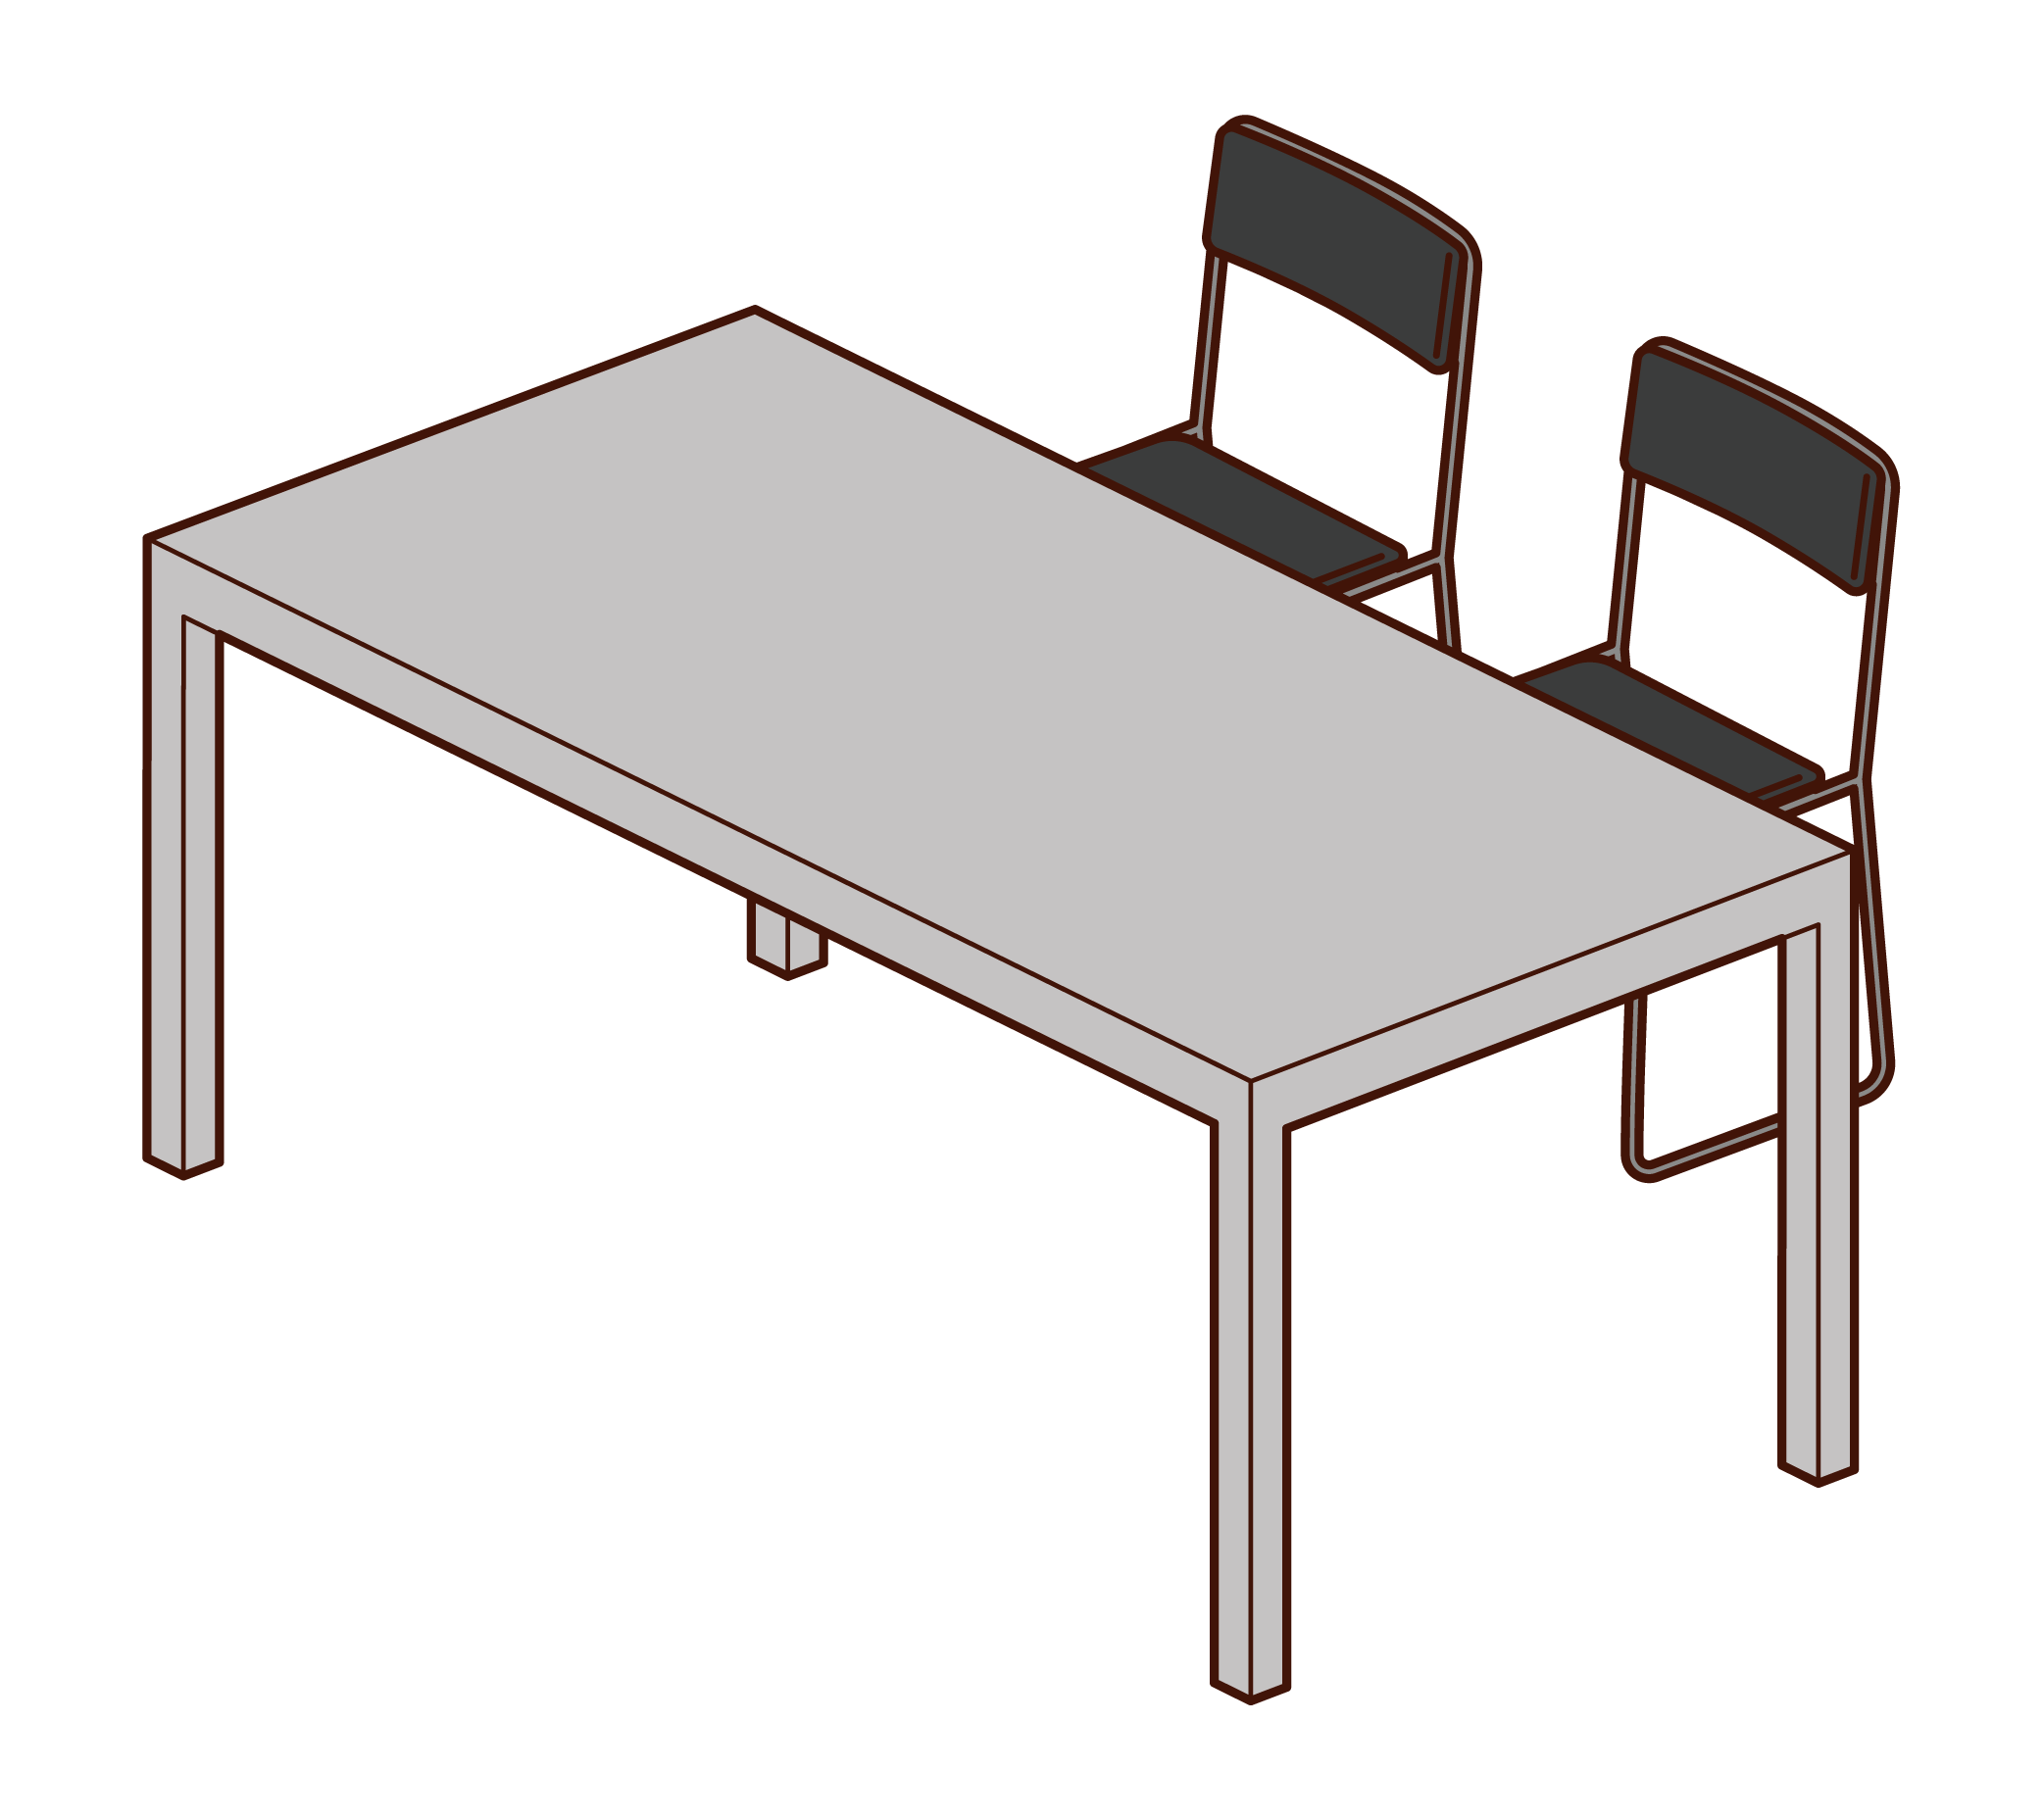 Office desk and chair illustrations